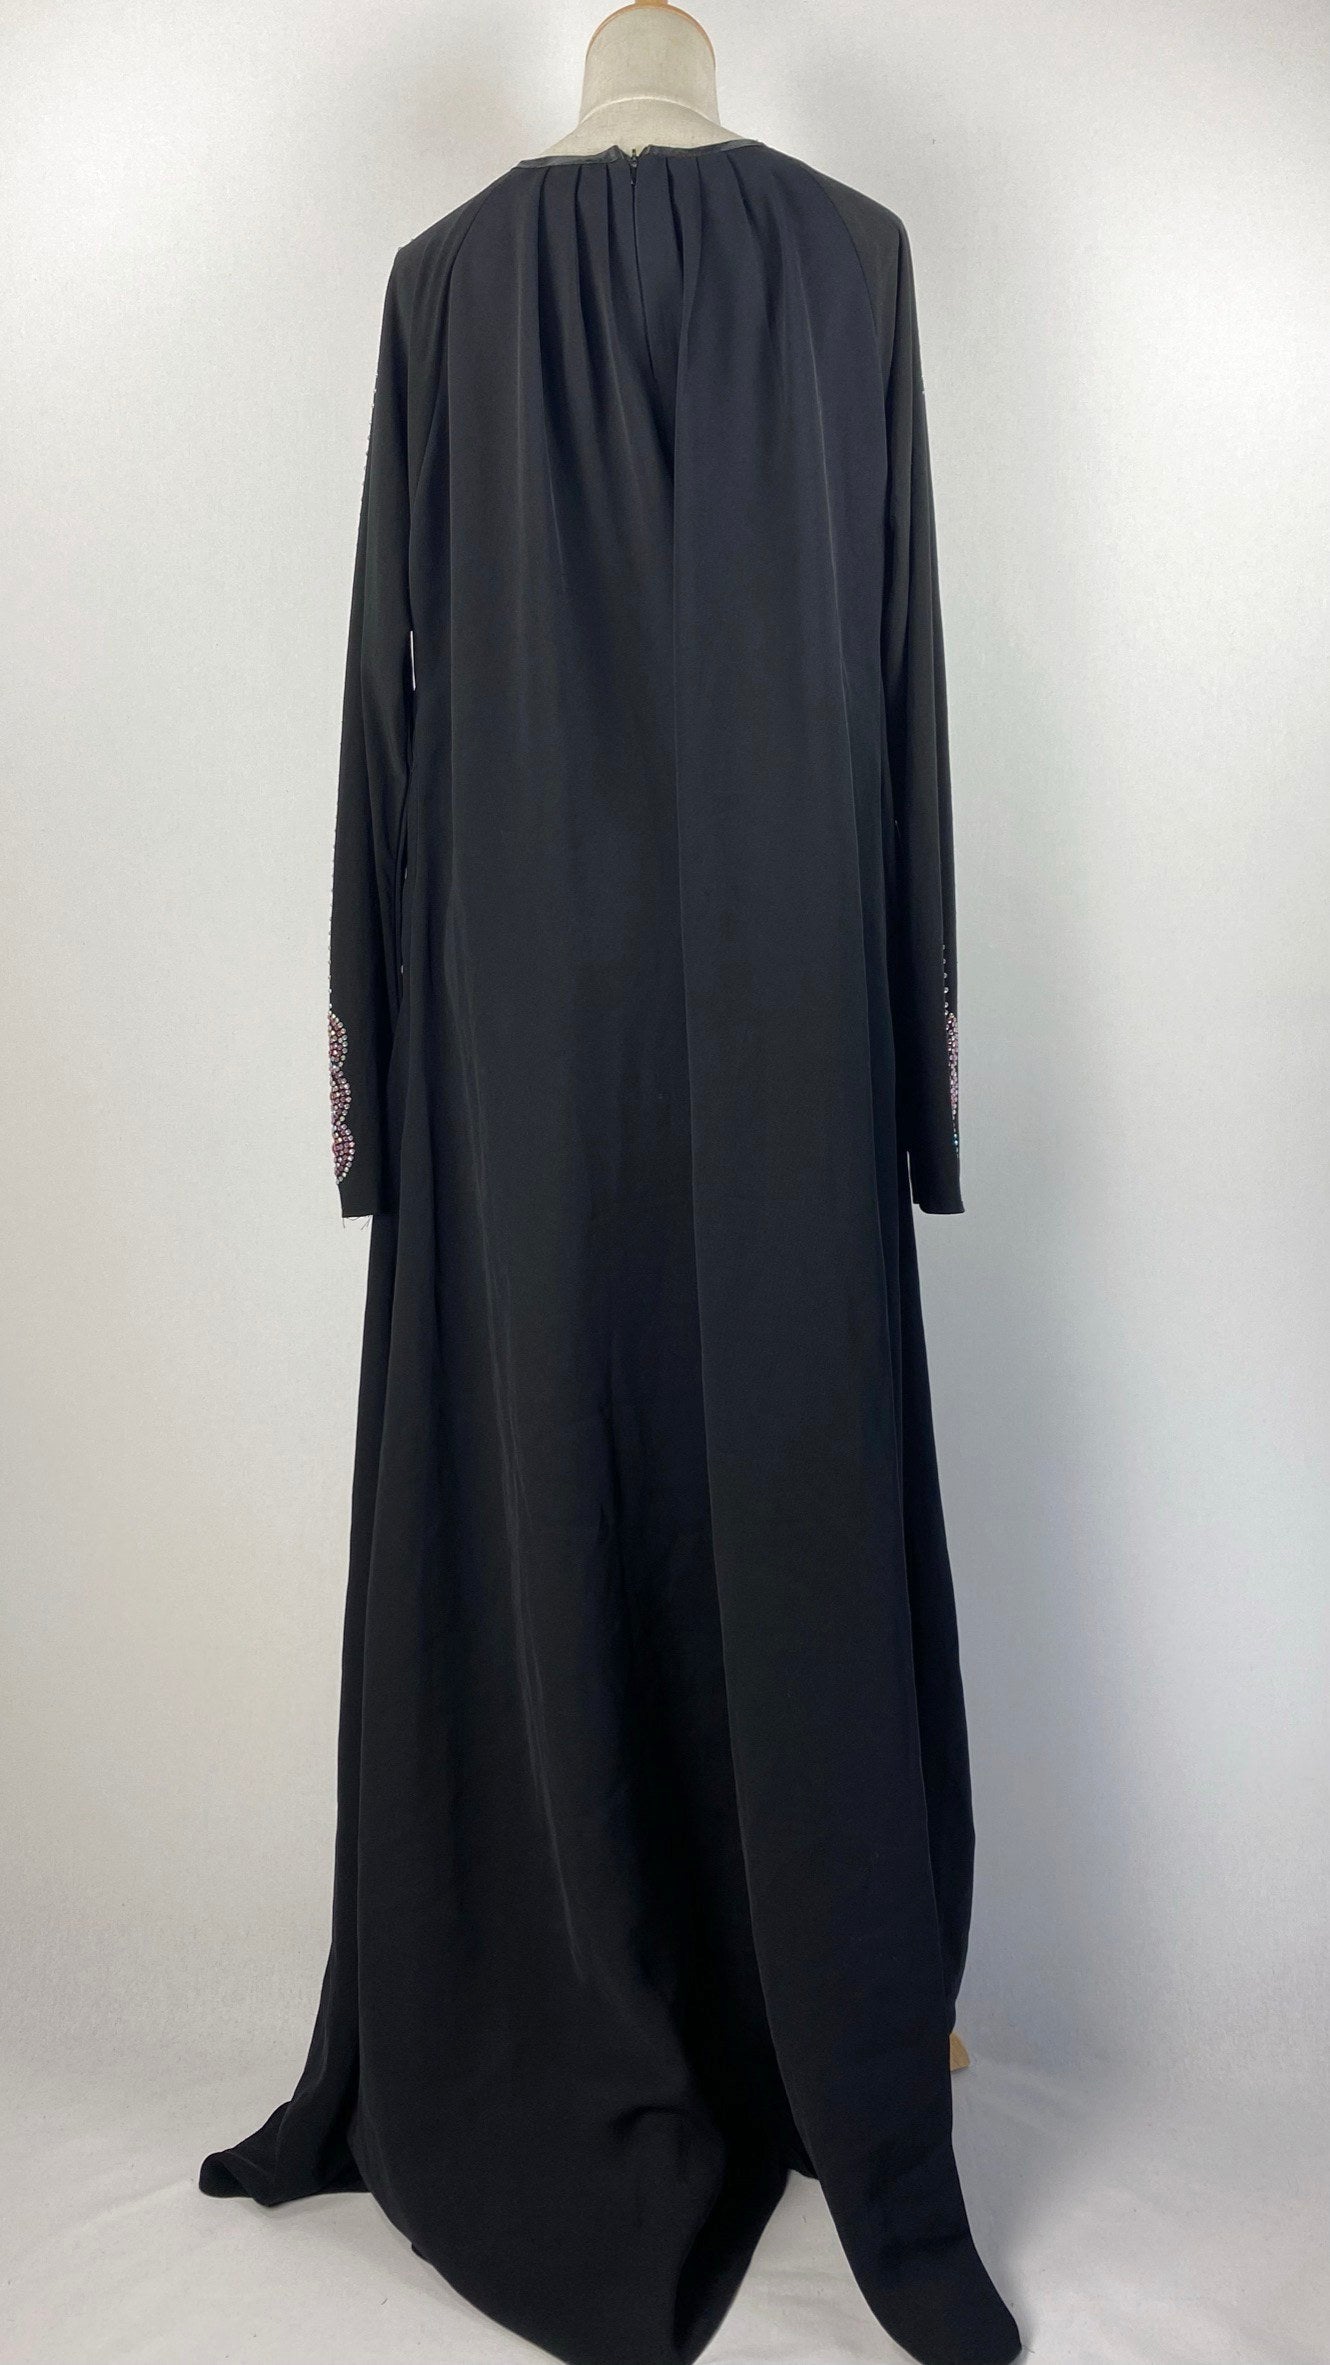 Long Sleeve Closed A-Line Abaya with Pink Beading, Black